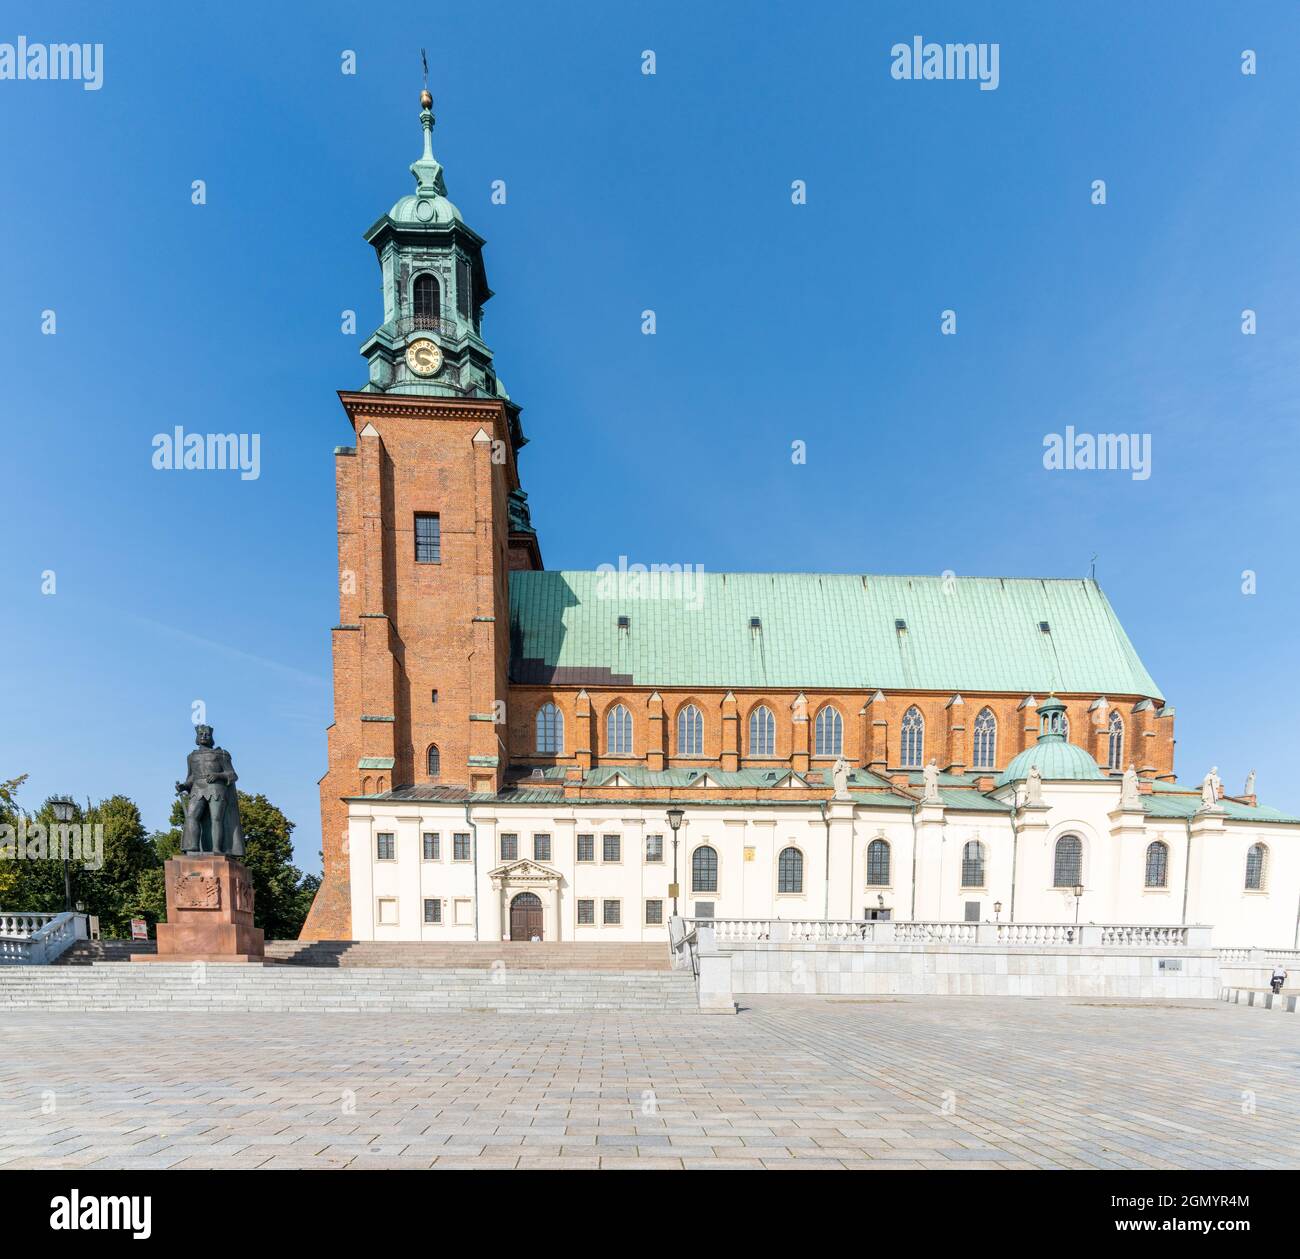 Gniezno, Poland - 7 September, 2021: horizontal view of the Royal Gniezno Cathedral in central Poland Stock Photo